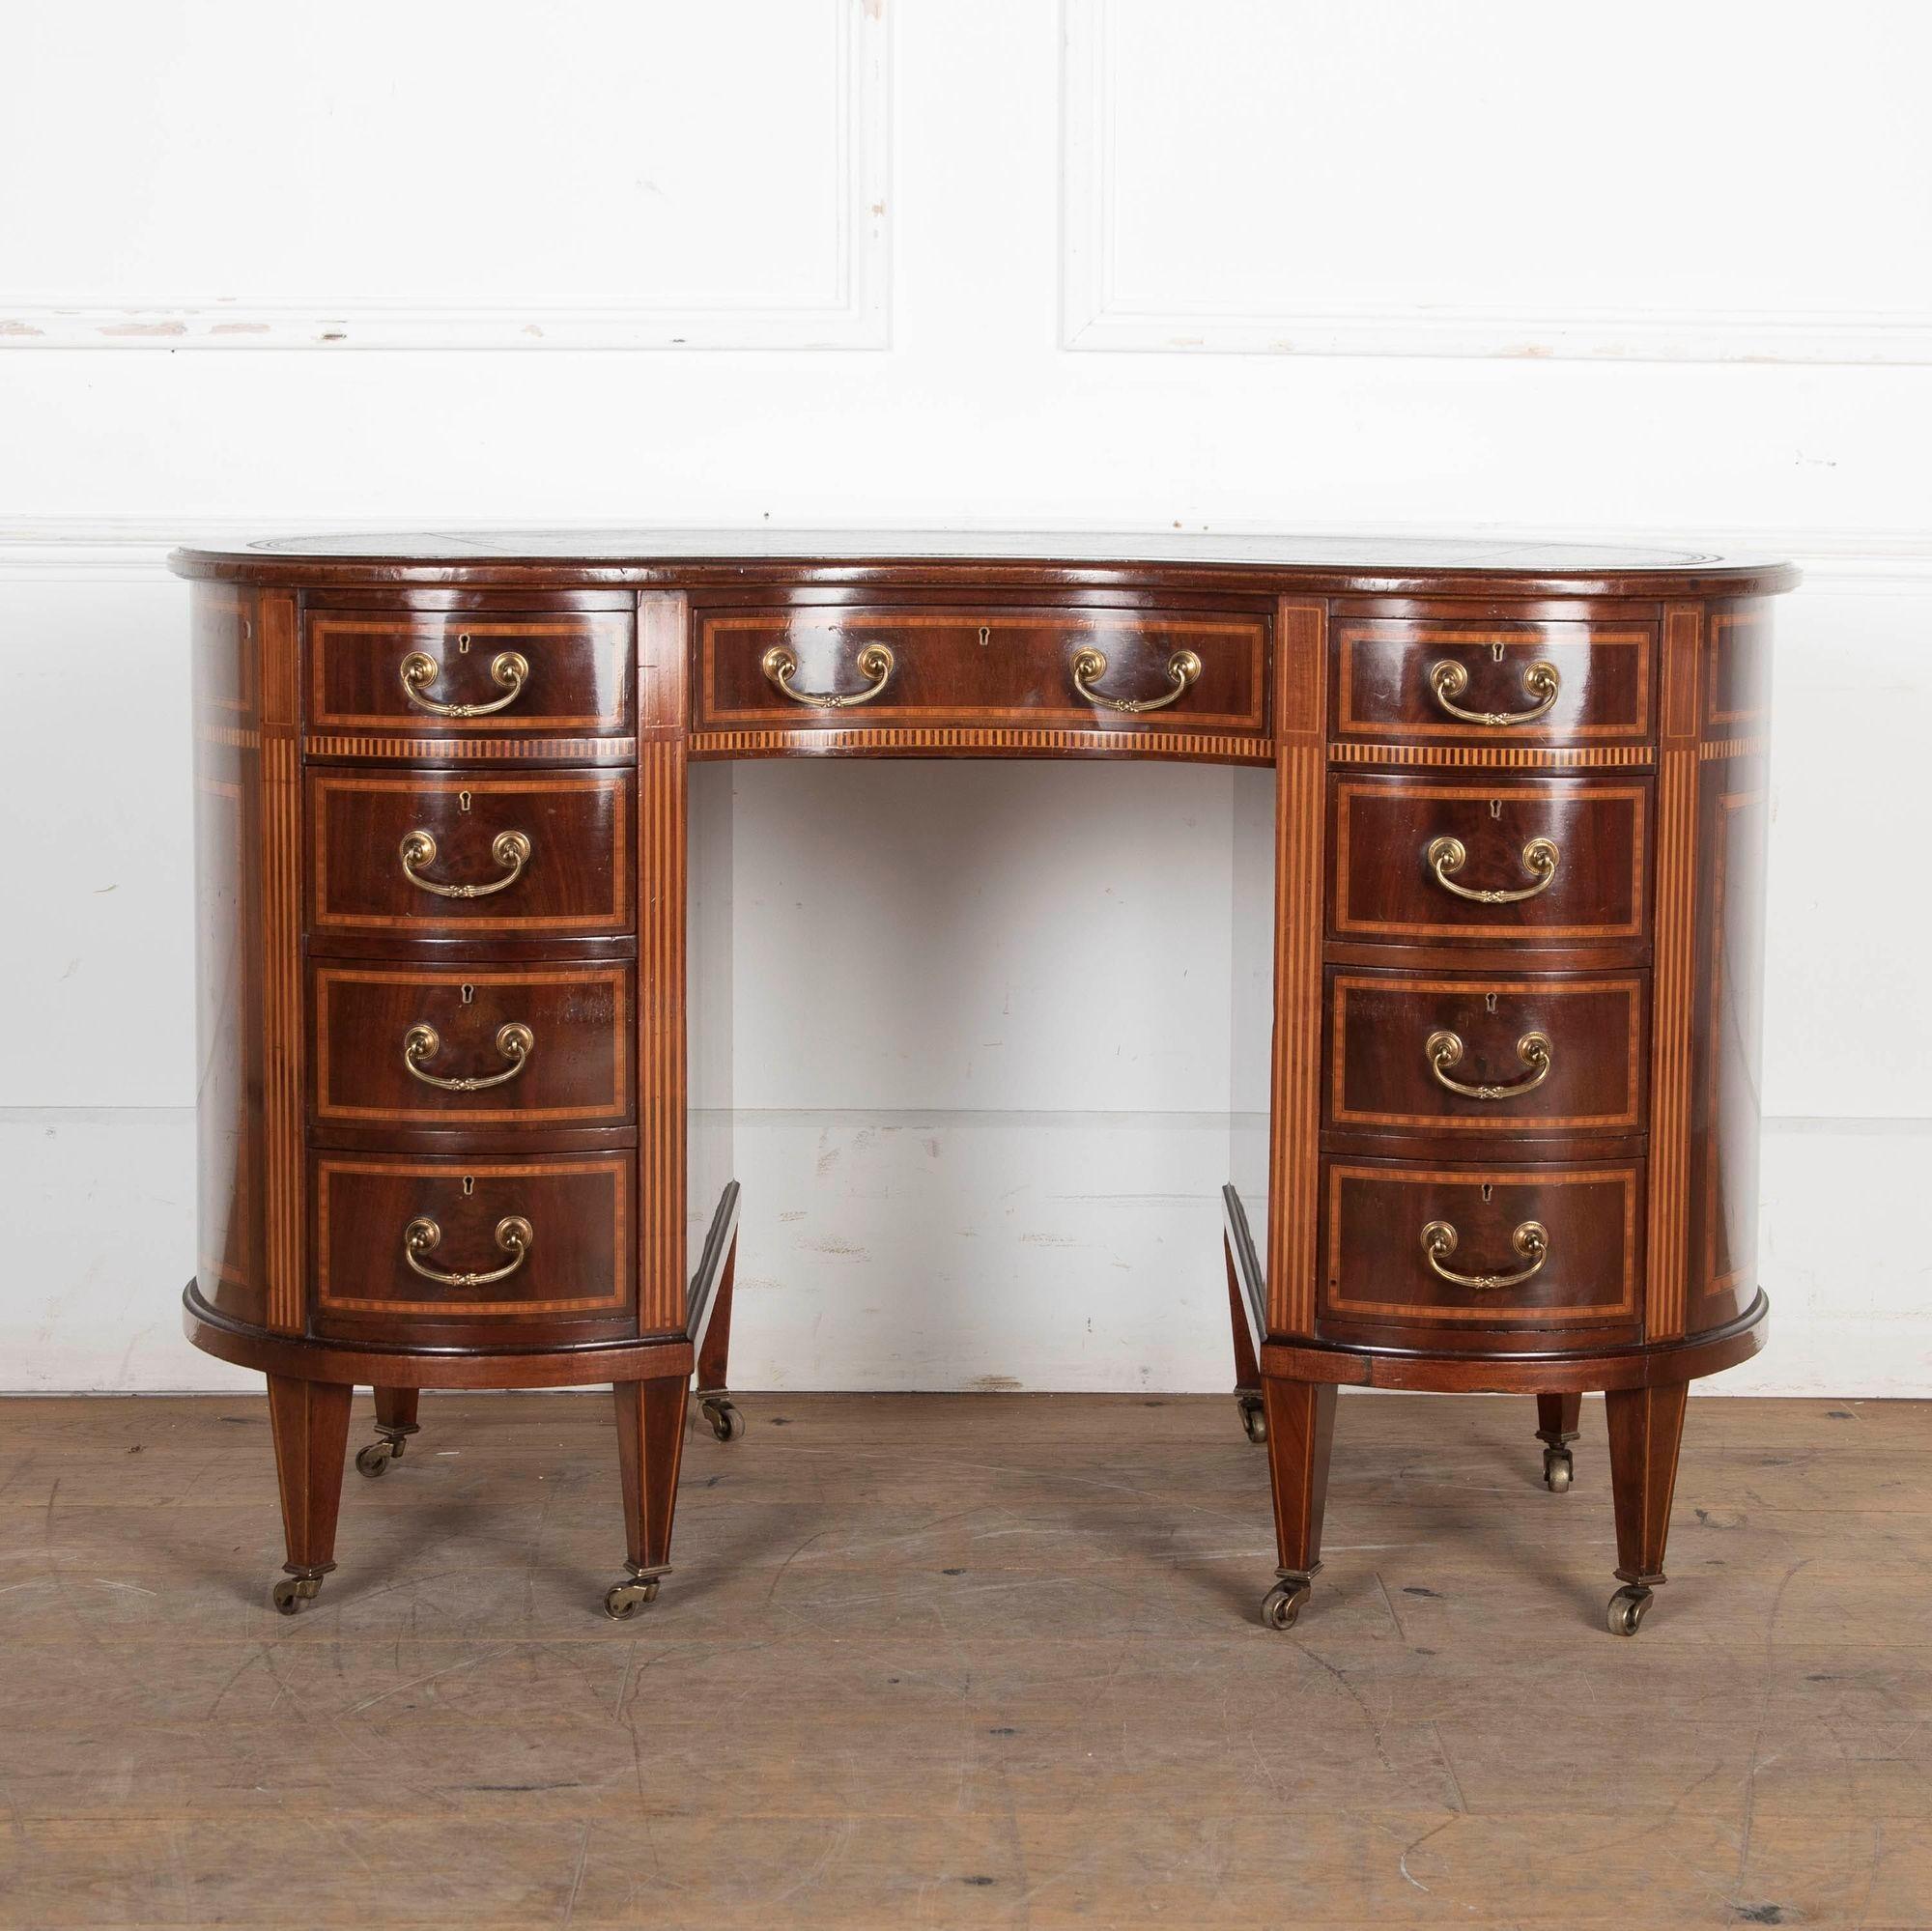 Very good quality early 20th century mahogany and inlaid writing desk. 
English, circa 1900 with original brass handles, castors, and leather inserts. Having nine mahogany lined drawers, this a very practical neat sized desk and would also make for